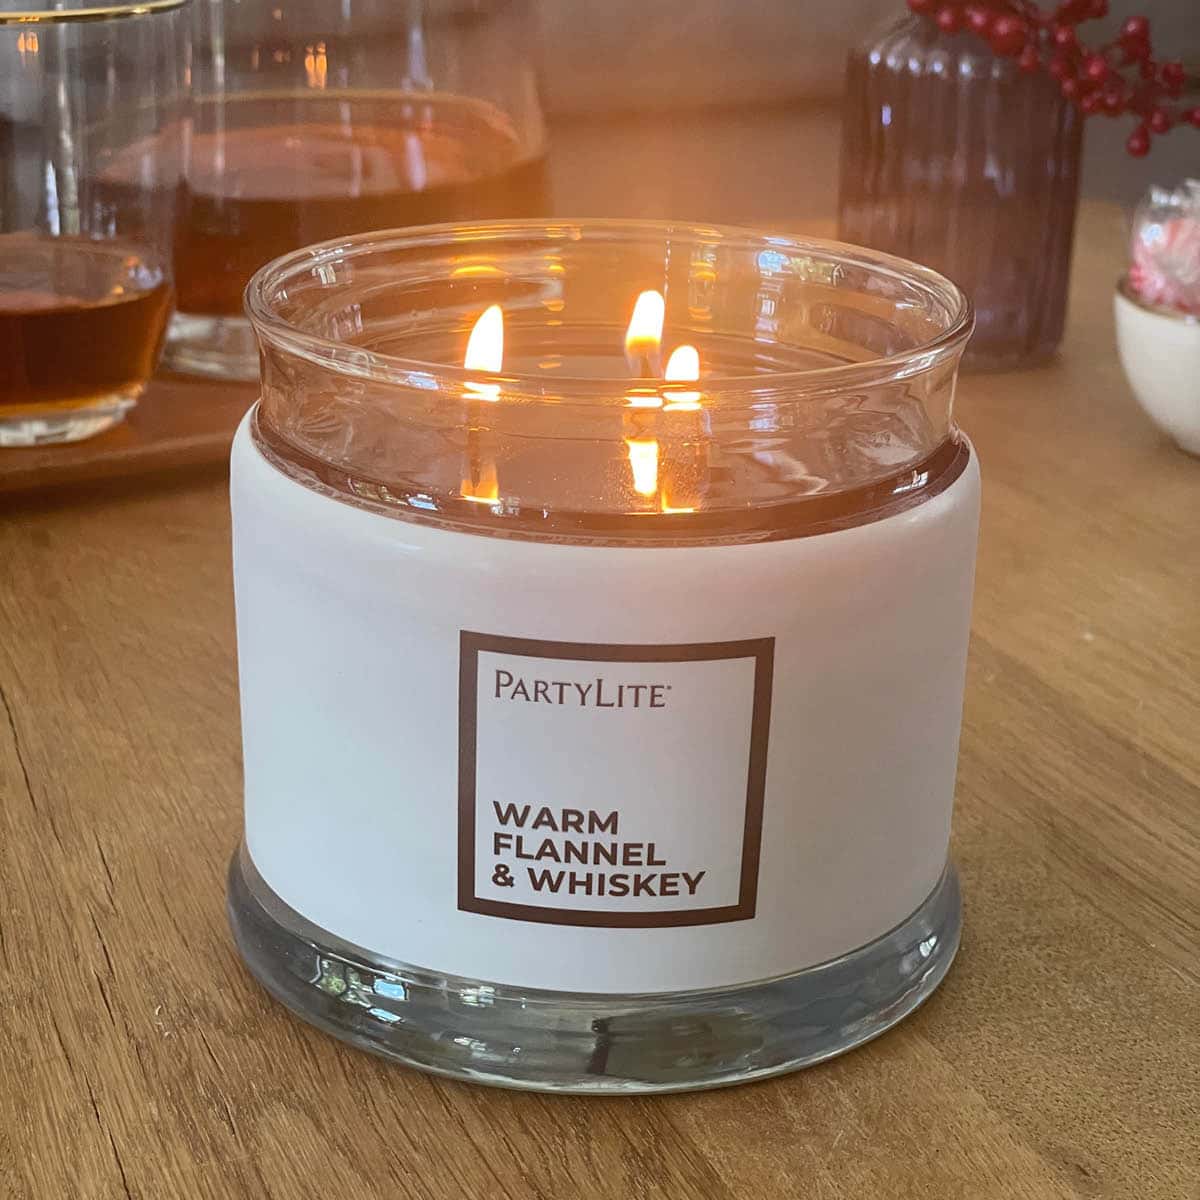 Warm Flannel Whiskey 3-Wick Jar Candle